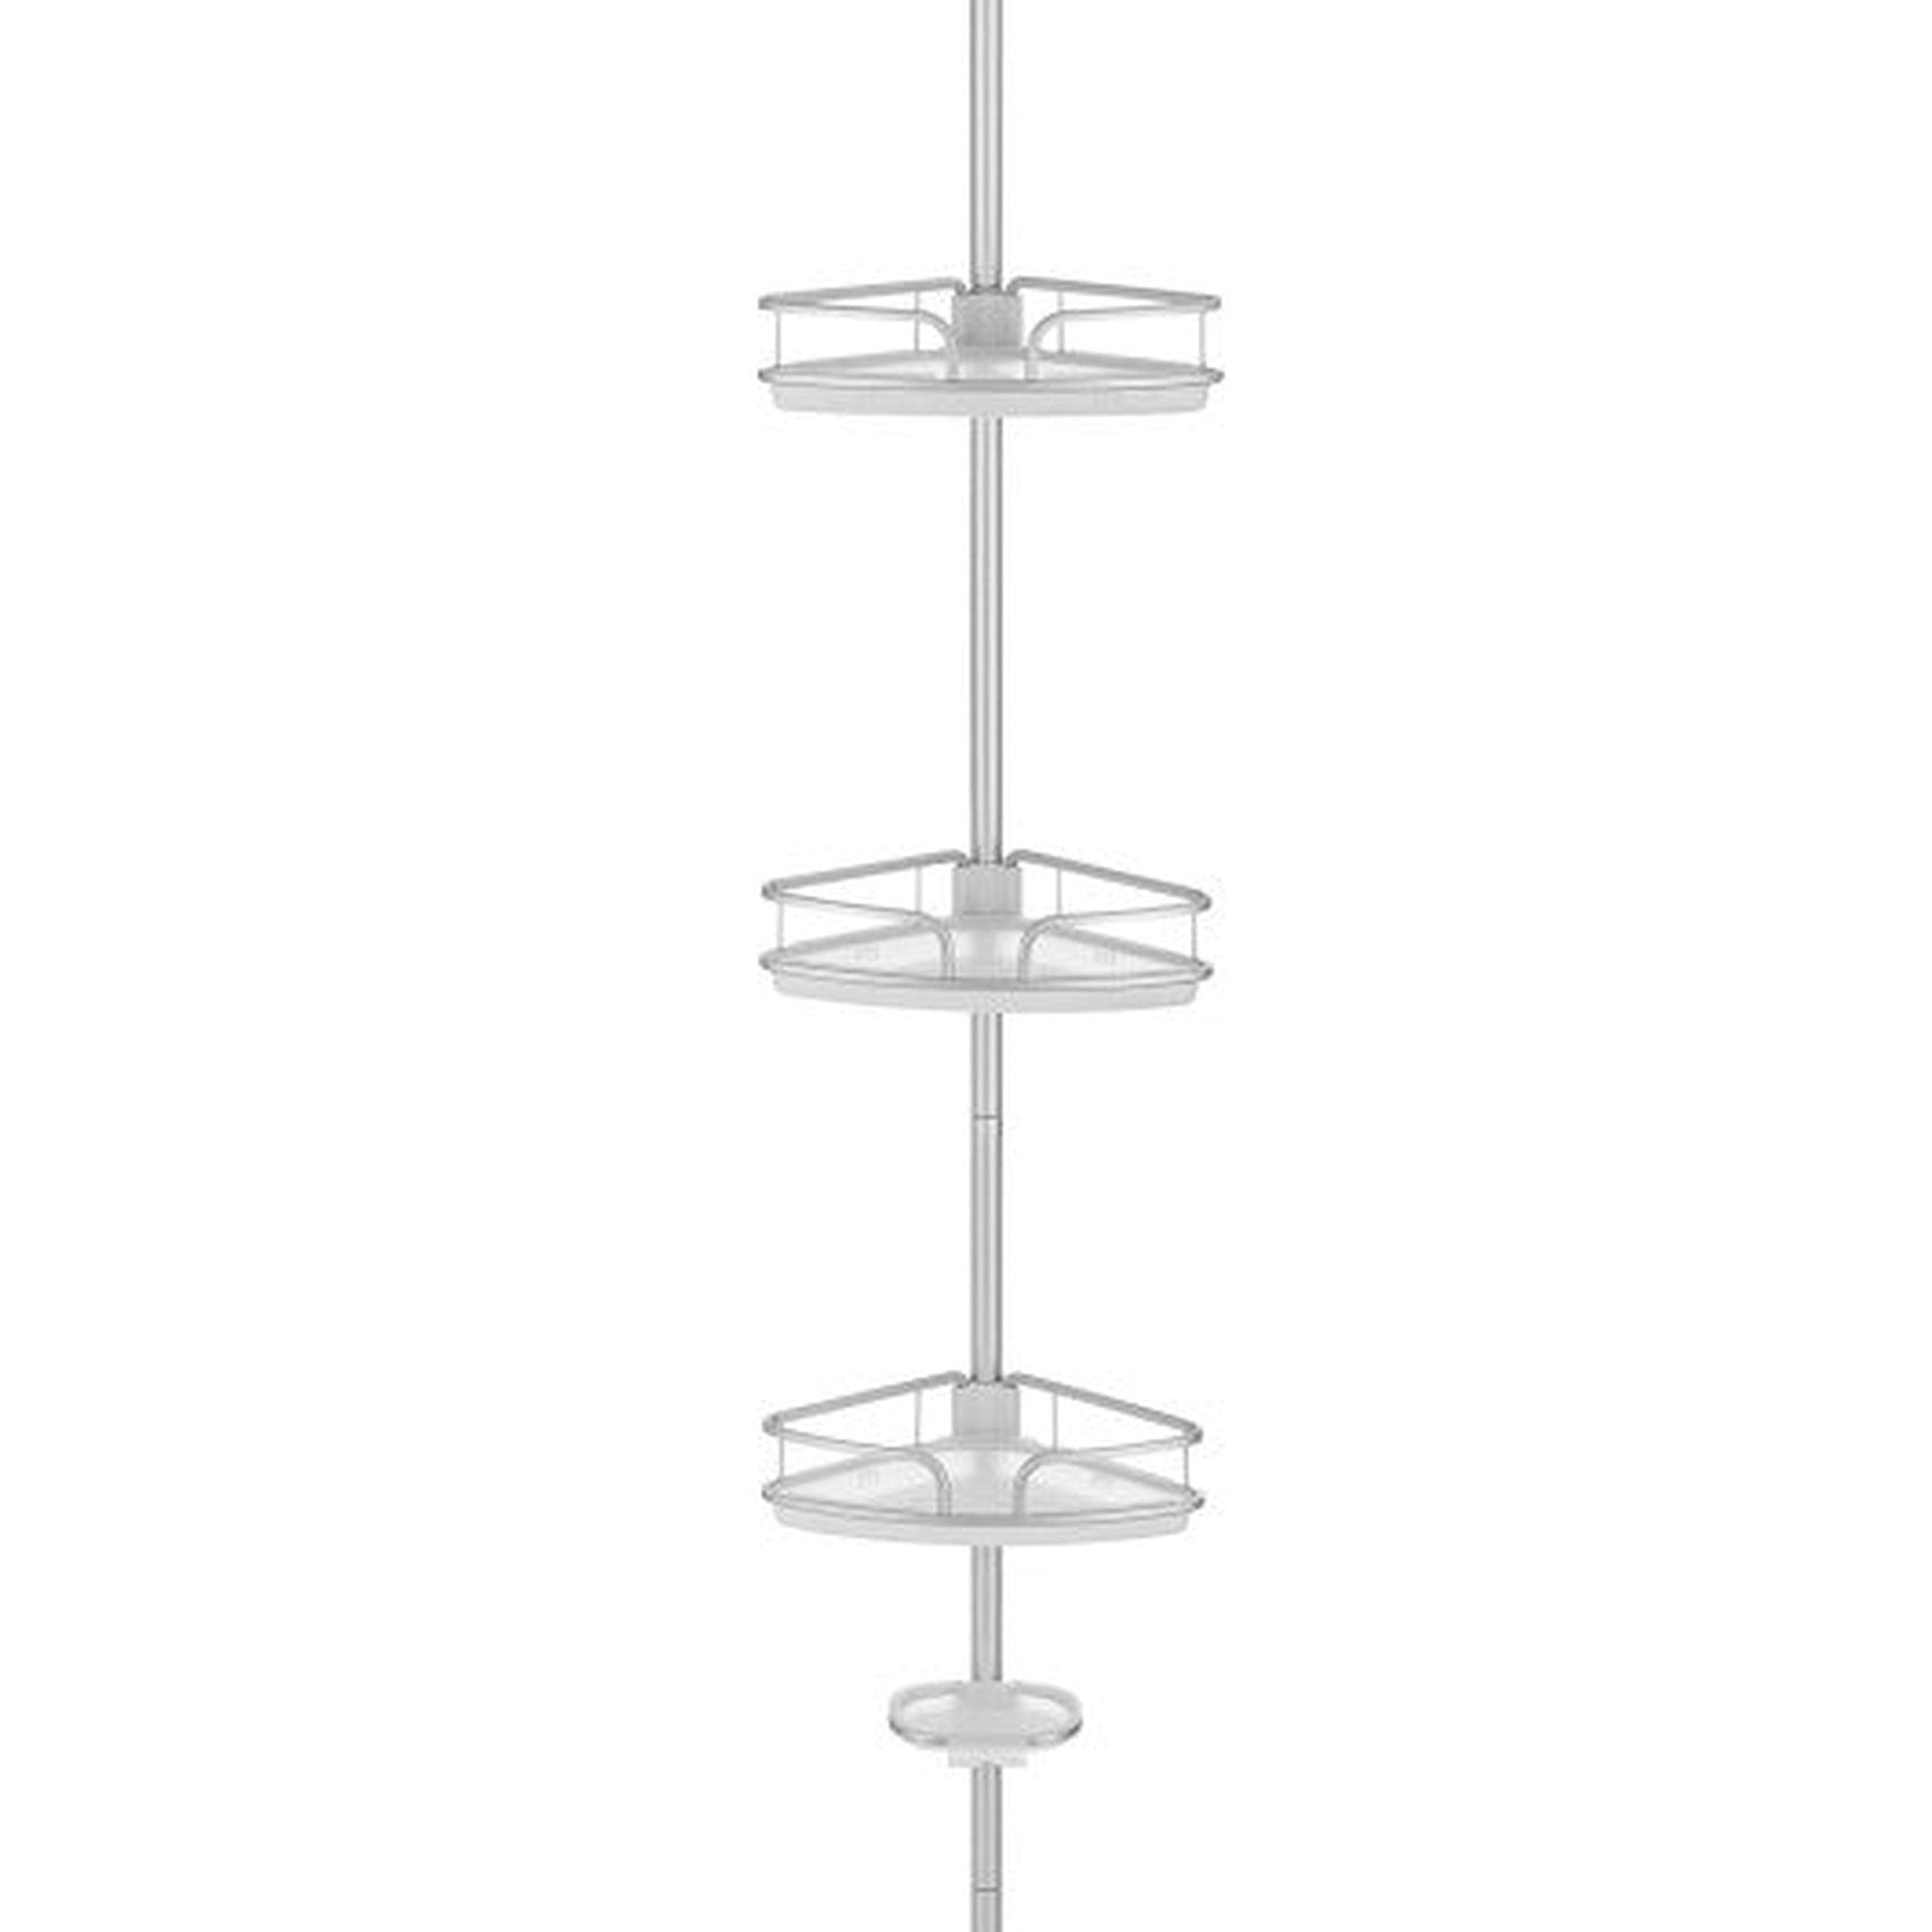 Corner Tension Pole Shower Caddy,4 Tiers Stainless Steel